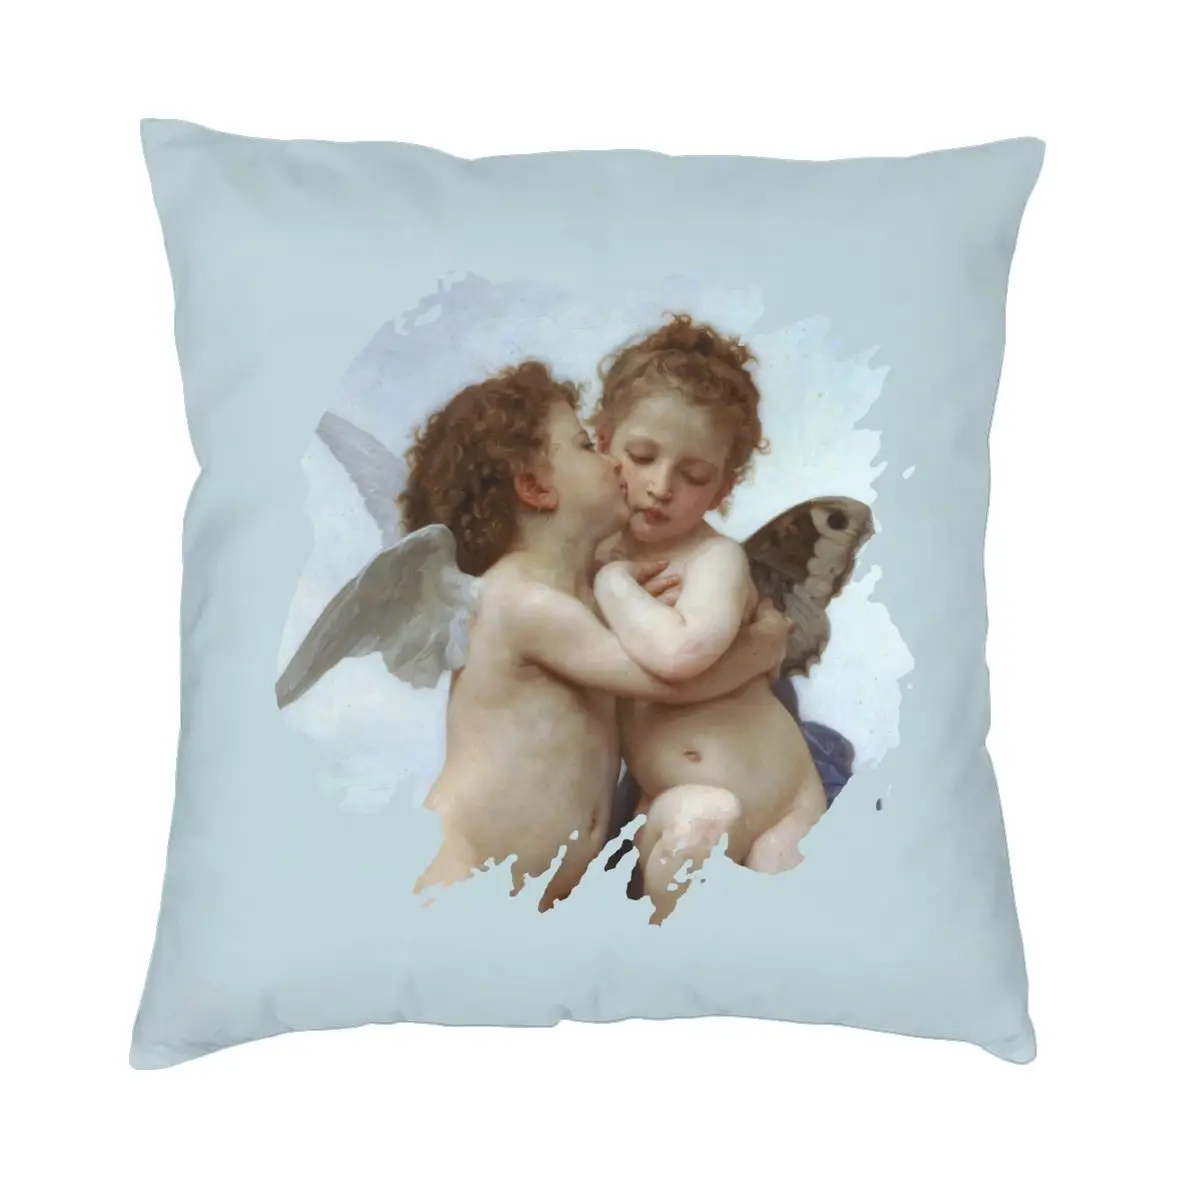 

Cupid And Psyche Children Pillowcase Printed Fabric Cushion Cover Gift Winged Cherubs Angels Throw Pillow Case Cover Seat 18''